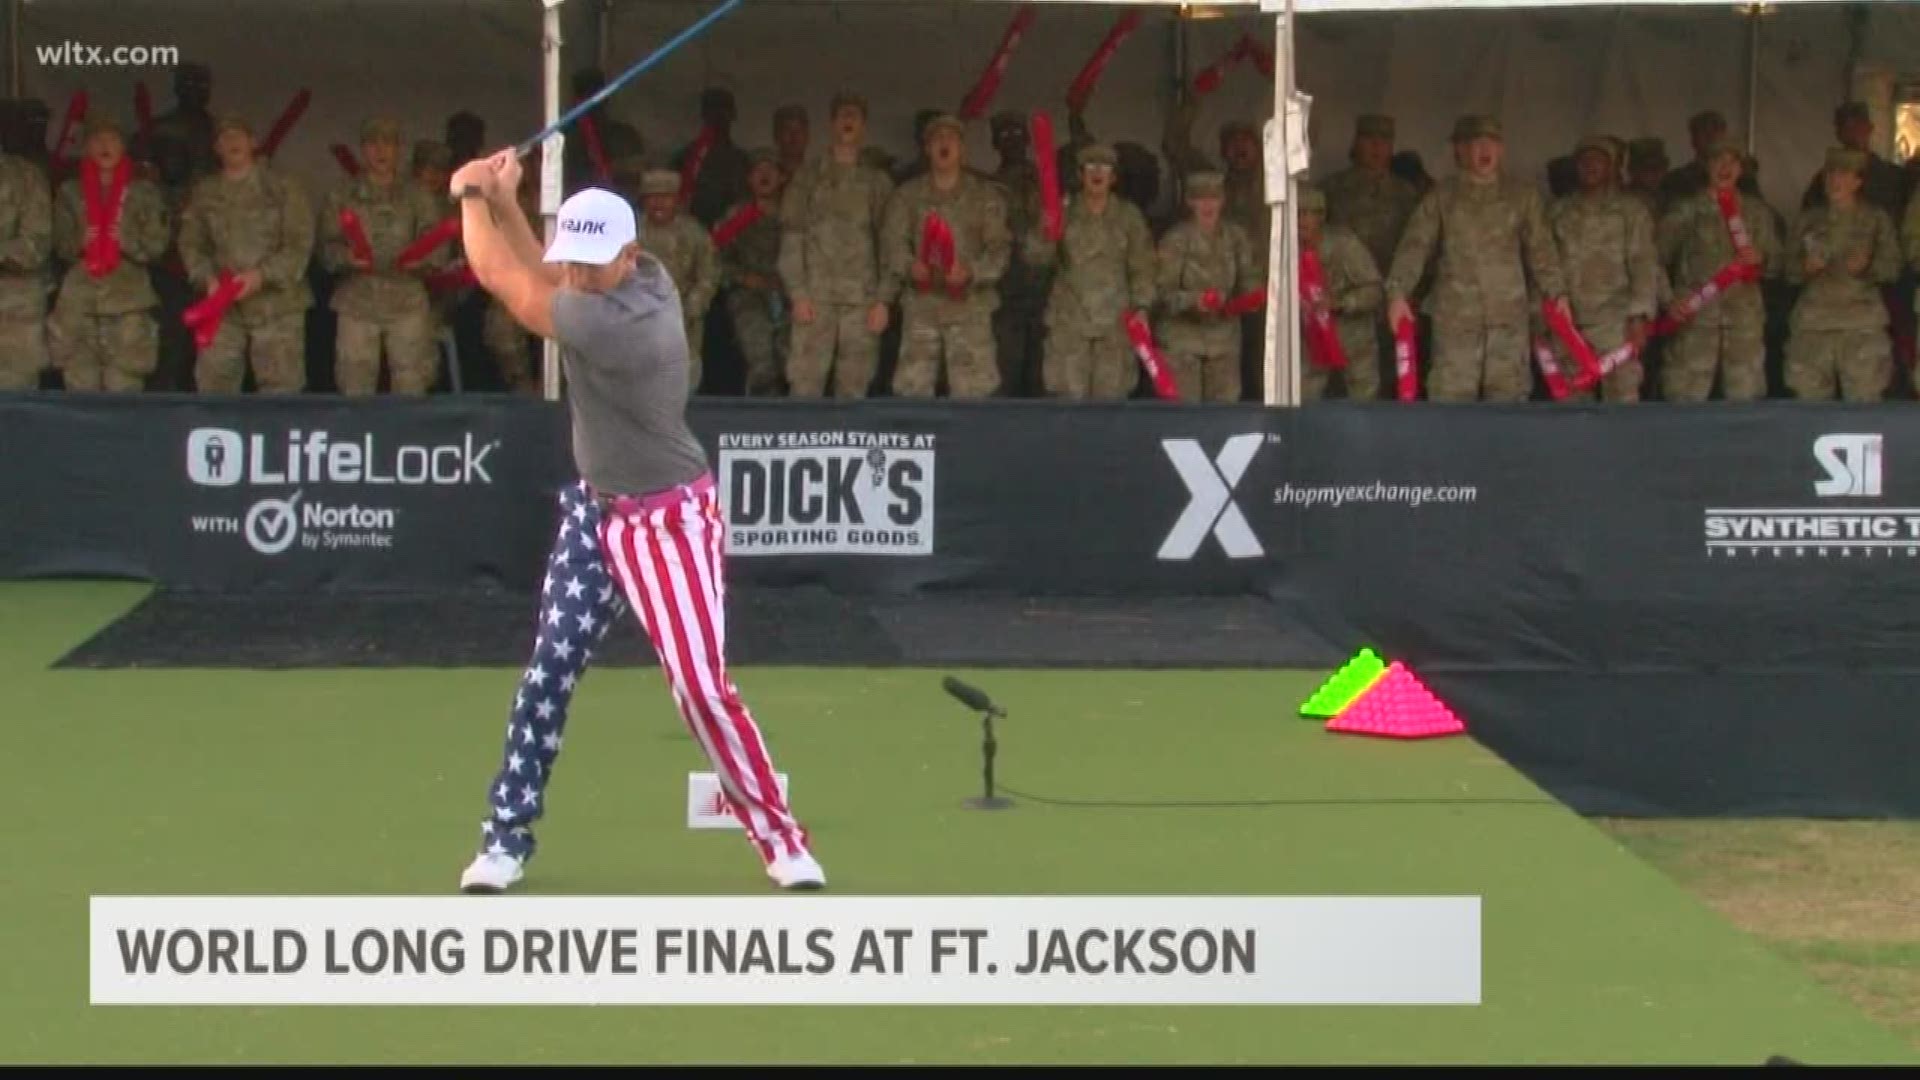 The World Long Drive tour capped off its three-day stint with the final rounds in front of a raucous group of Fort Jackson soldiers.